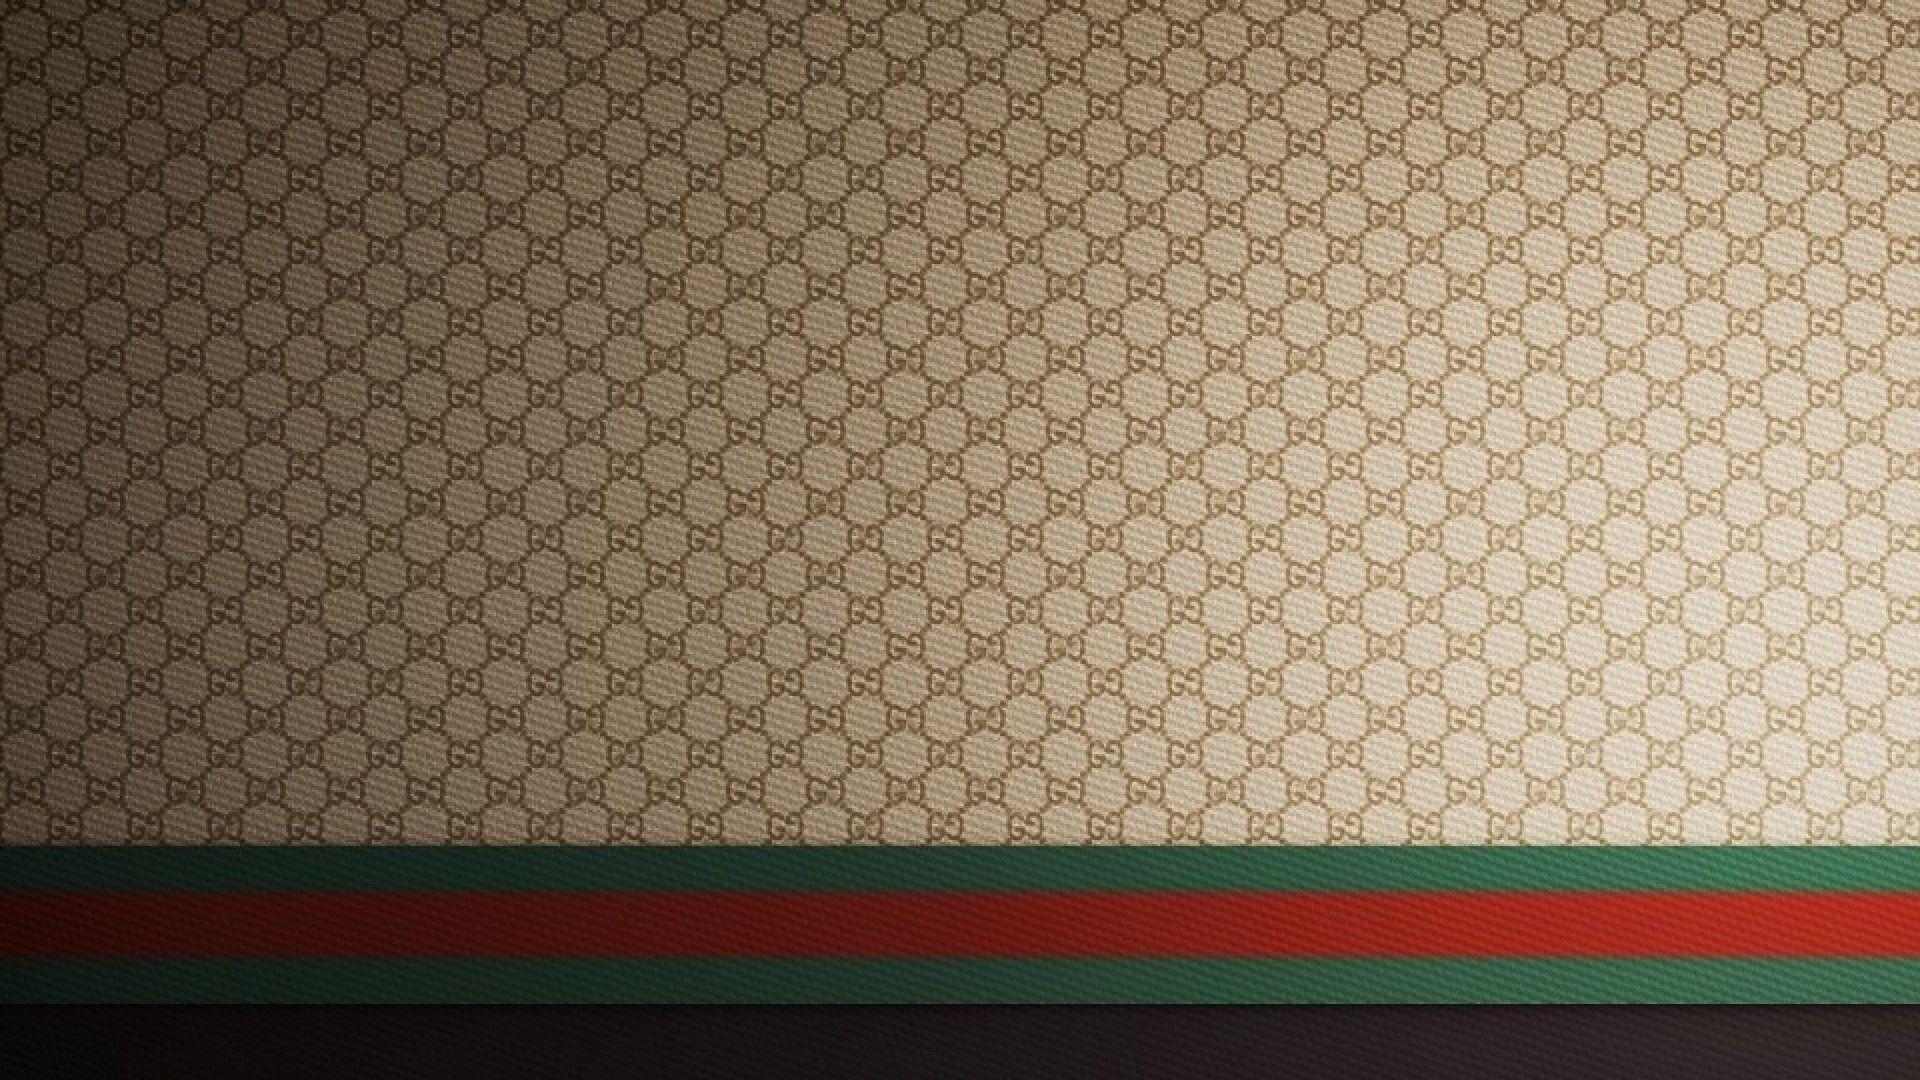 Gucci 4k Wallpapers Top Free Gucci 4k Backgrounds Wallpaperaccess